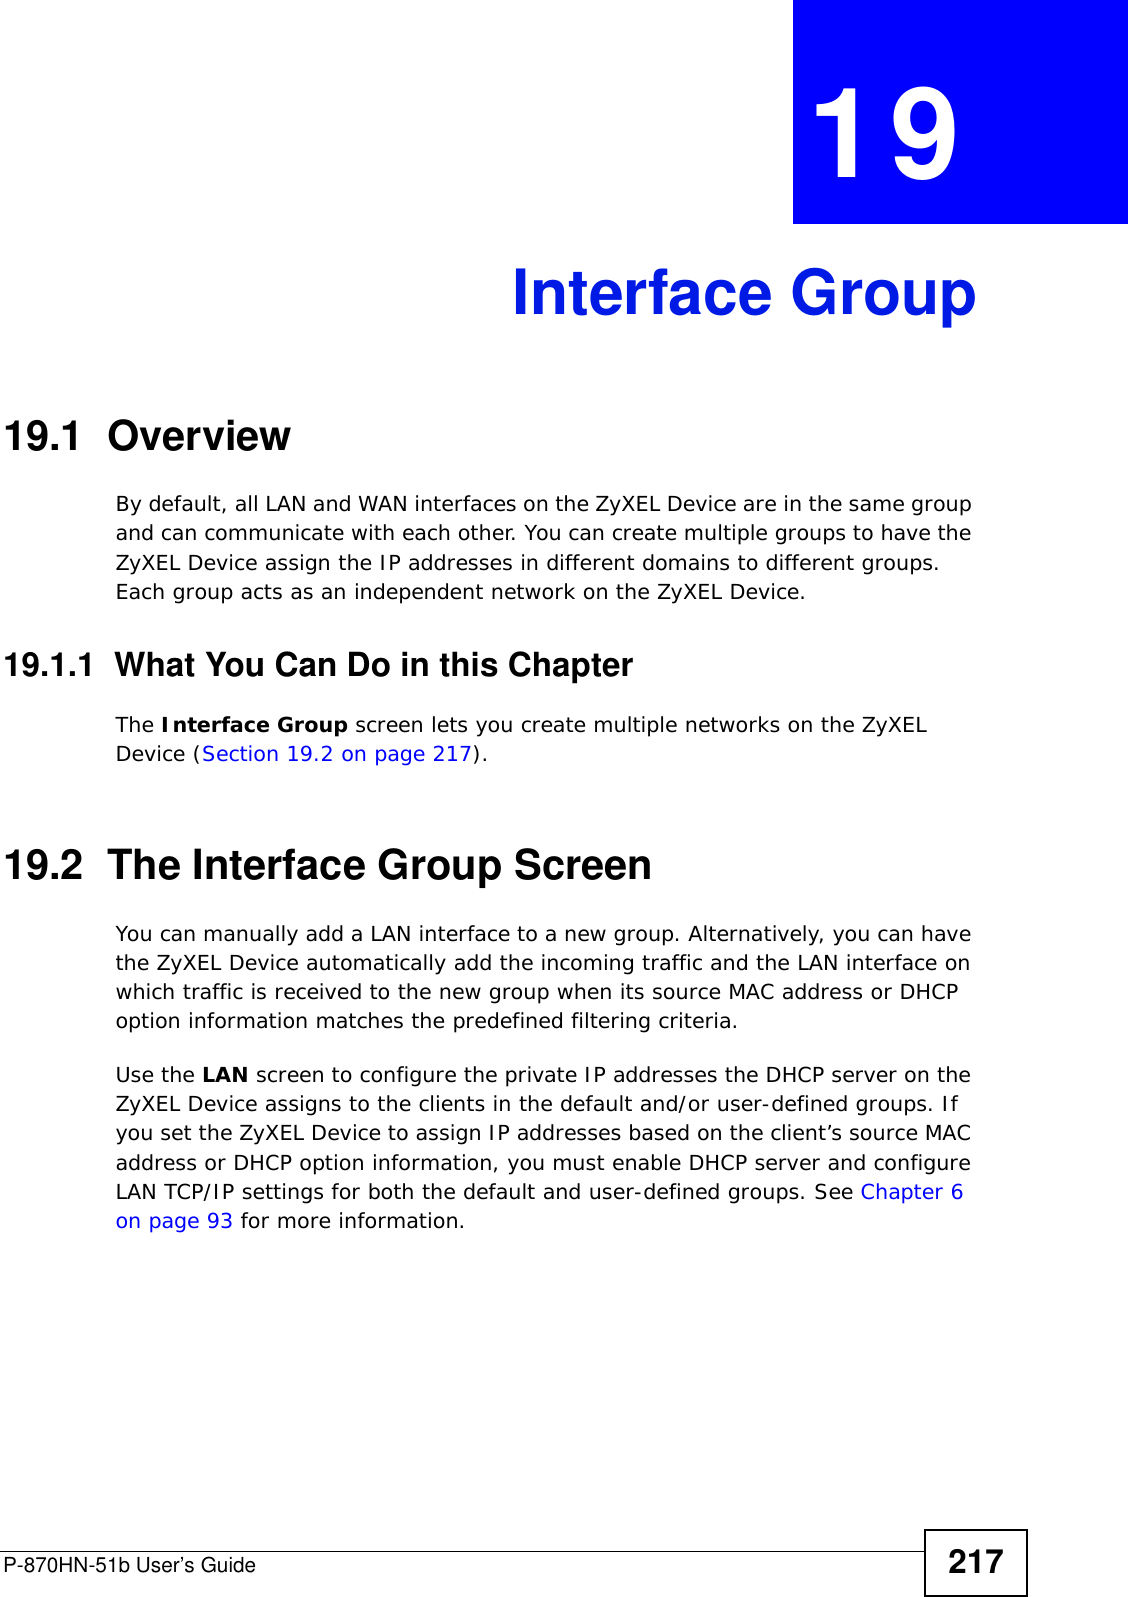 P-870HN-51b User’s Guide 217CHAPTER  19 Interface Group19.1  OverviewBy default, all LAN and WAN interfaces on the ZyXEL Device are in the same group and can communicate with each other. You can create multiple groups to have the ZyXEL Device assign the IP addresses in different domains to different groups. Each group acts as an independent network on the ZyXEL Device. 19.1.1  What You Can Do in this ChapterThe Interface Group screen lets you create multiple networks on the ZyXEL Device (Section 19.2 on page 217).19.2  The Interface Group ScreenYou can manually add a LAN interface to a new group. Alternatively, you can have the ZyXEL Device automatically add the incoming traffic and the LAN interface on which traffic is received to the new group when its source MAC address or DHCP option information matches the predefined filtering criteria.Use the LAN screen to configure the private IP addresses the DHCP server on the ZyXEL Device assigns to the clients in the default and/or user-defined groups. If you set the ZyXEL Device to assign IP addresses based on the client’s source MAC address or DHCP option information, you must enable DHCP server and configure LAN TCP/IP settings for both the default and user-defined groups. See Chapter 6 on page 93 for more information.